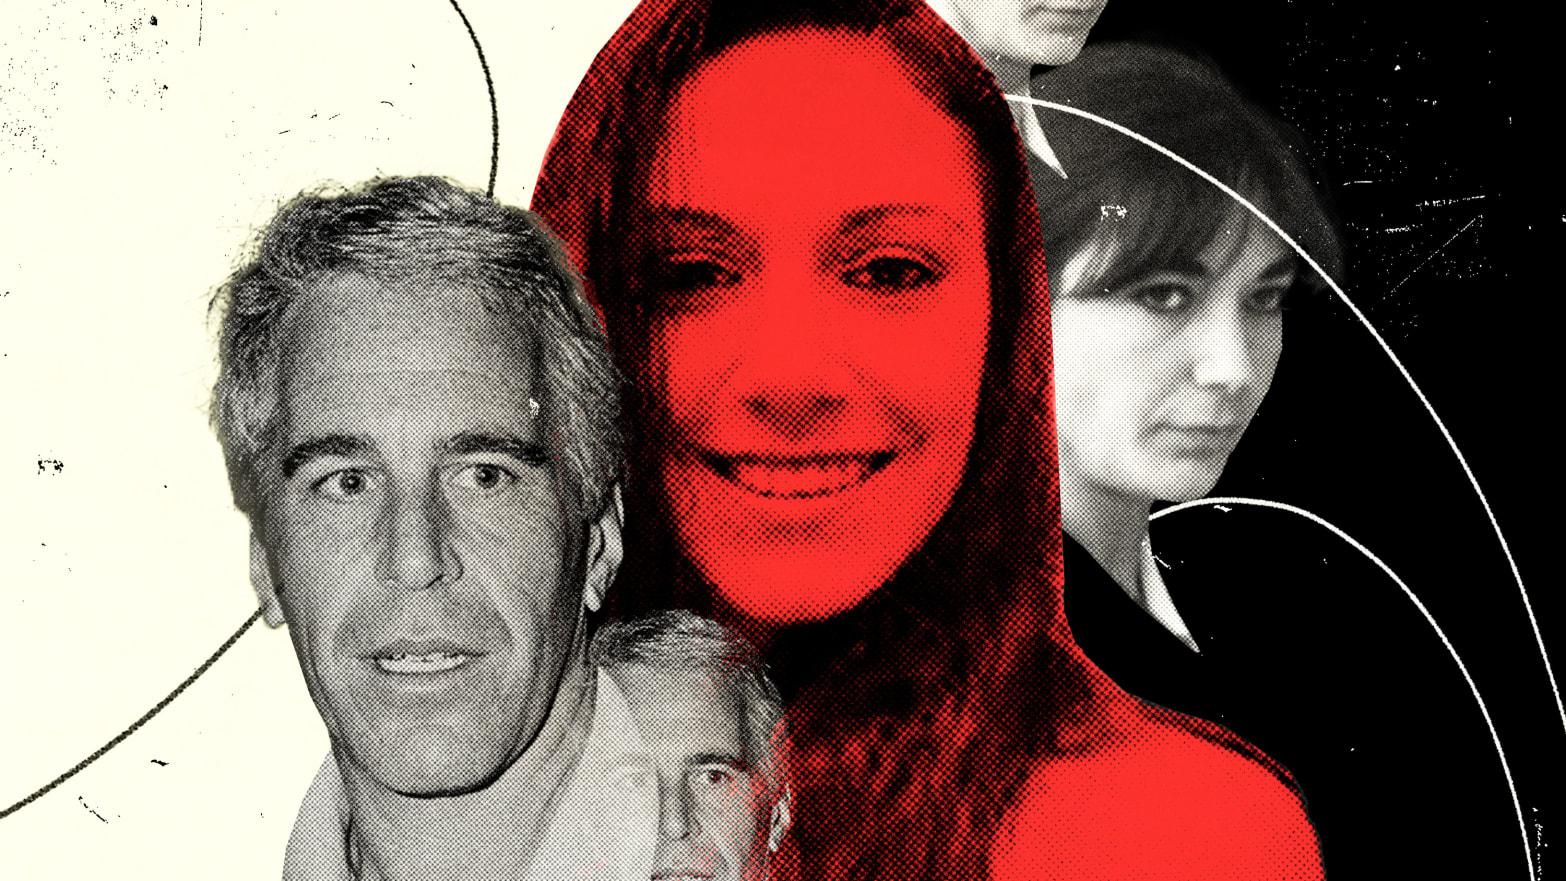 A photo illustration of Carolyn Andriano in red with Jeffrey Epstein and Ghislaine Maxwell in black and white.